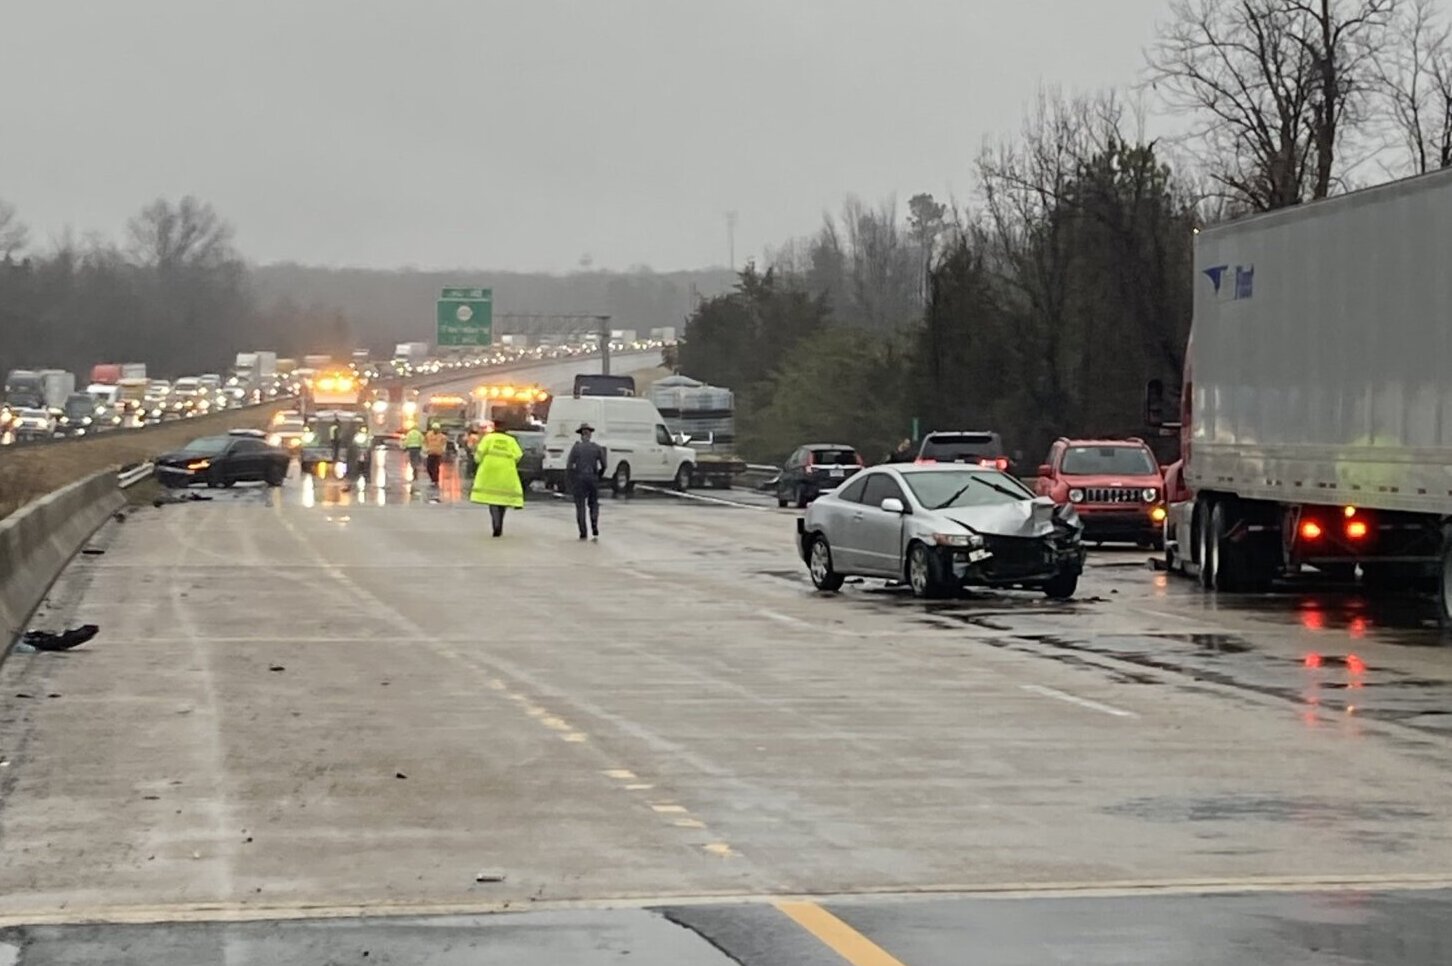 13 vehicles crash in ‘chain reaction’ along I-95 in Virginia